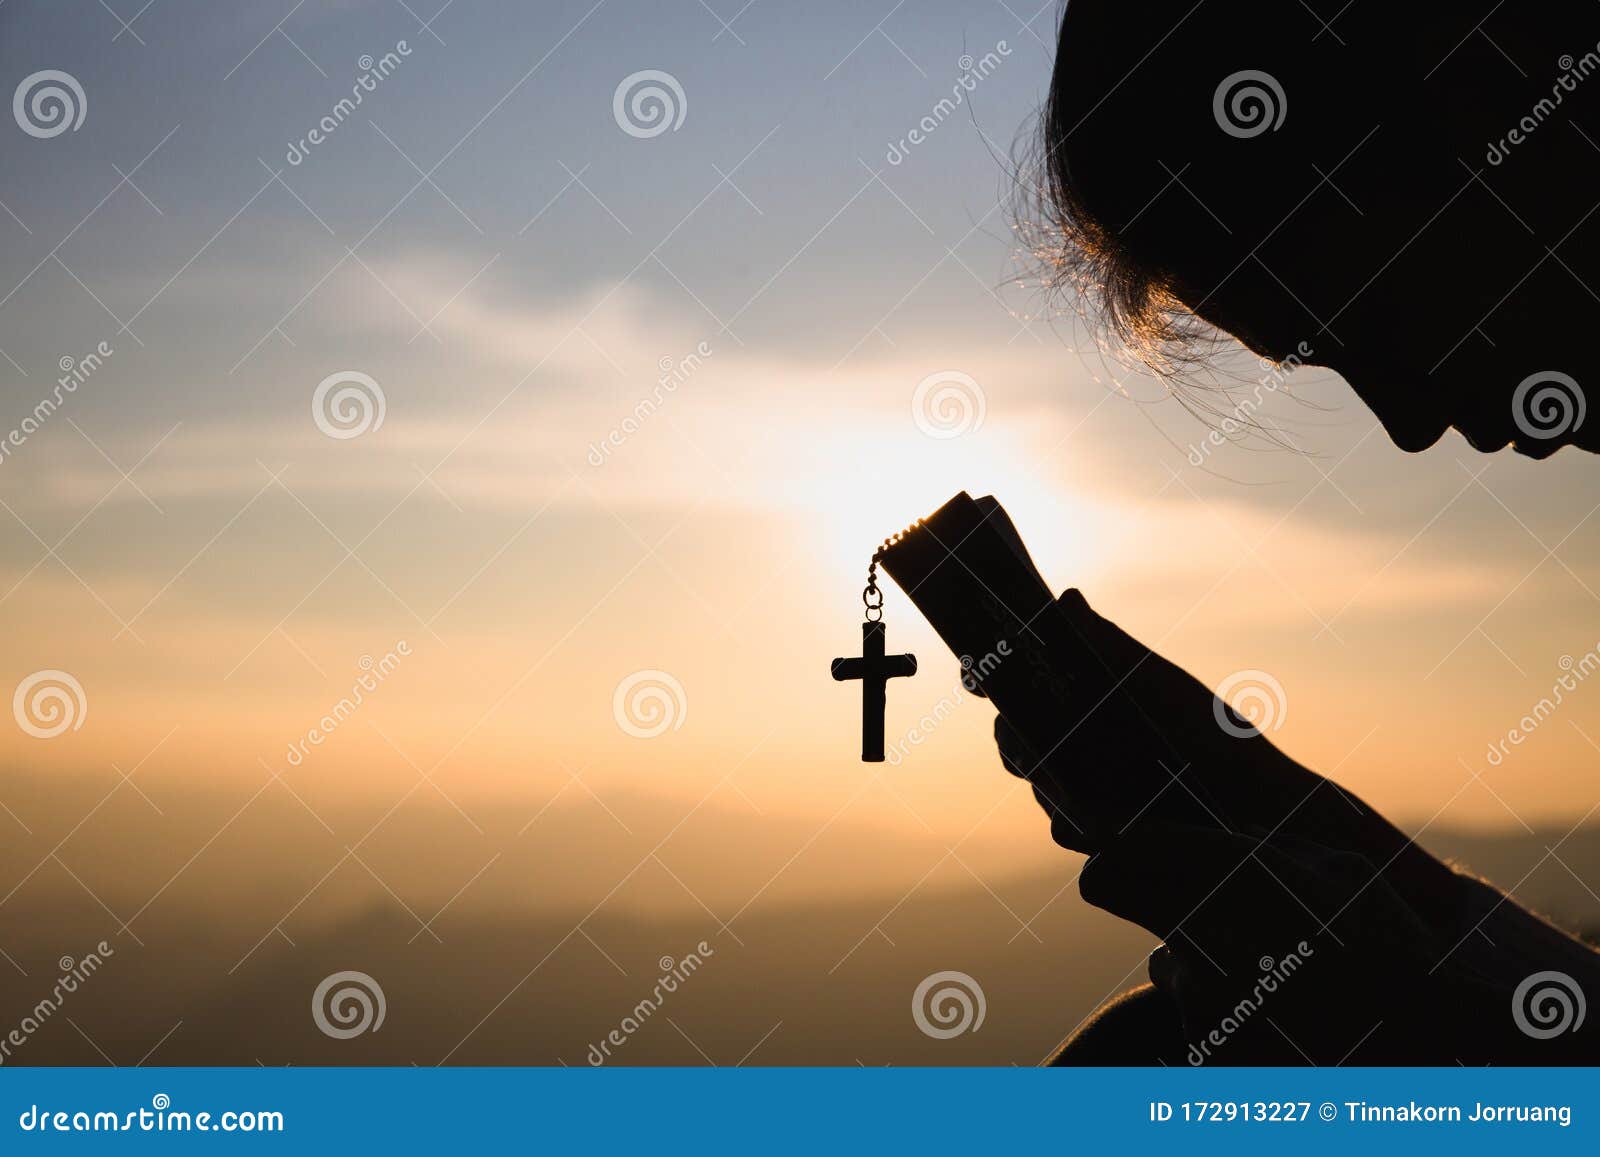 siluette of christian woman  holding a bible and wooden christian cross necklace while praying to god